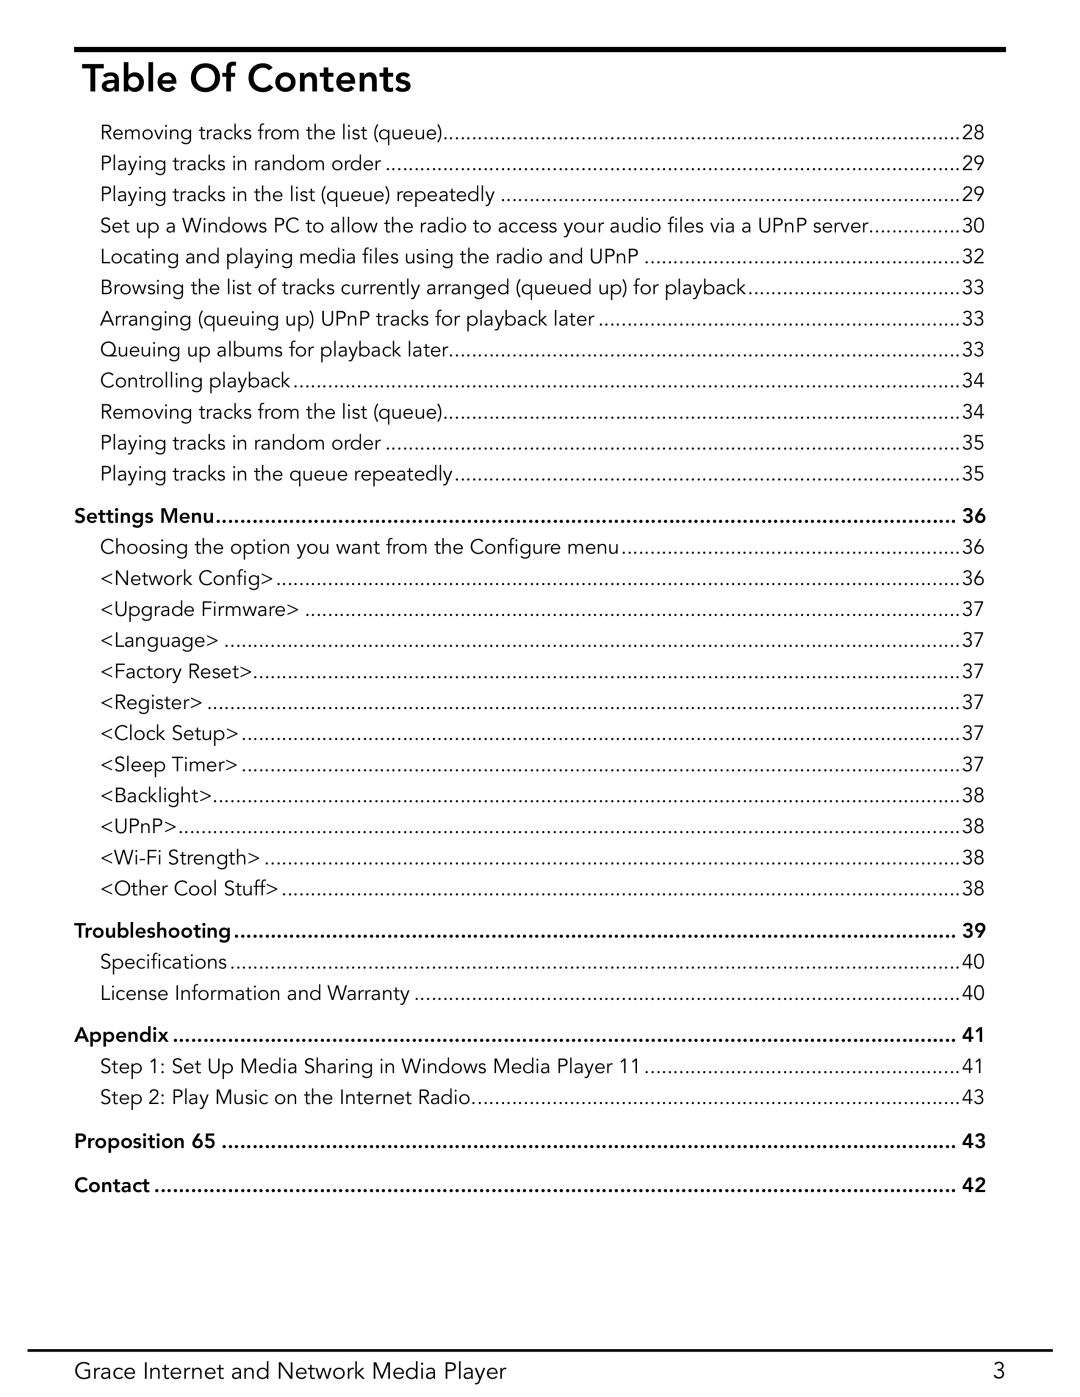 Grace GDI-IR3020 manual Table Of Contents, Grace Internet and Network Media Player 